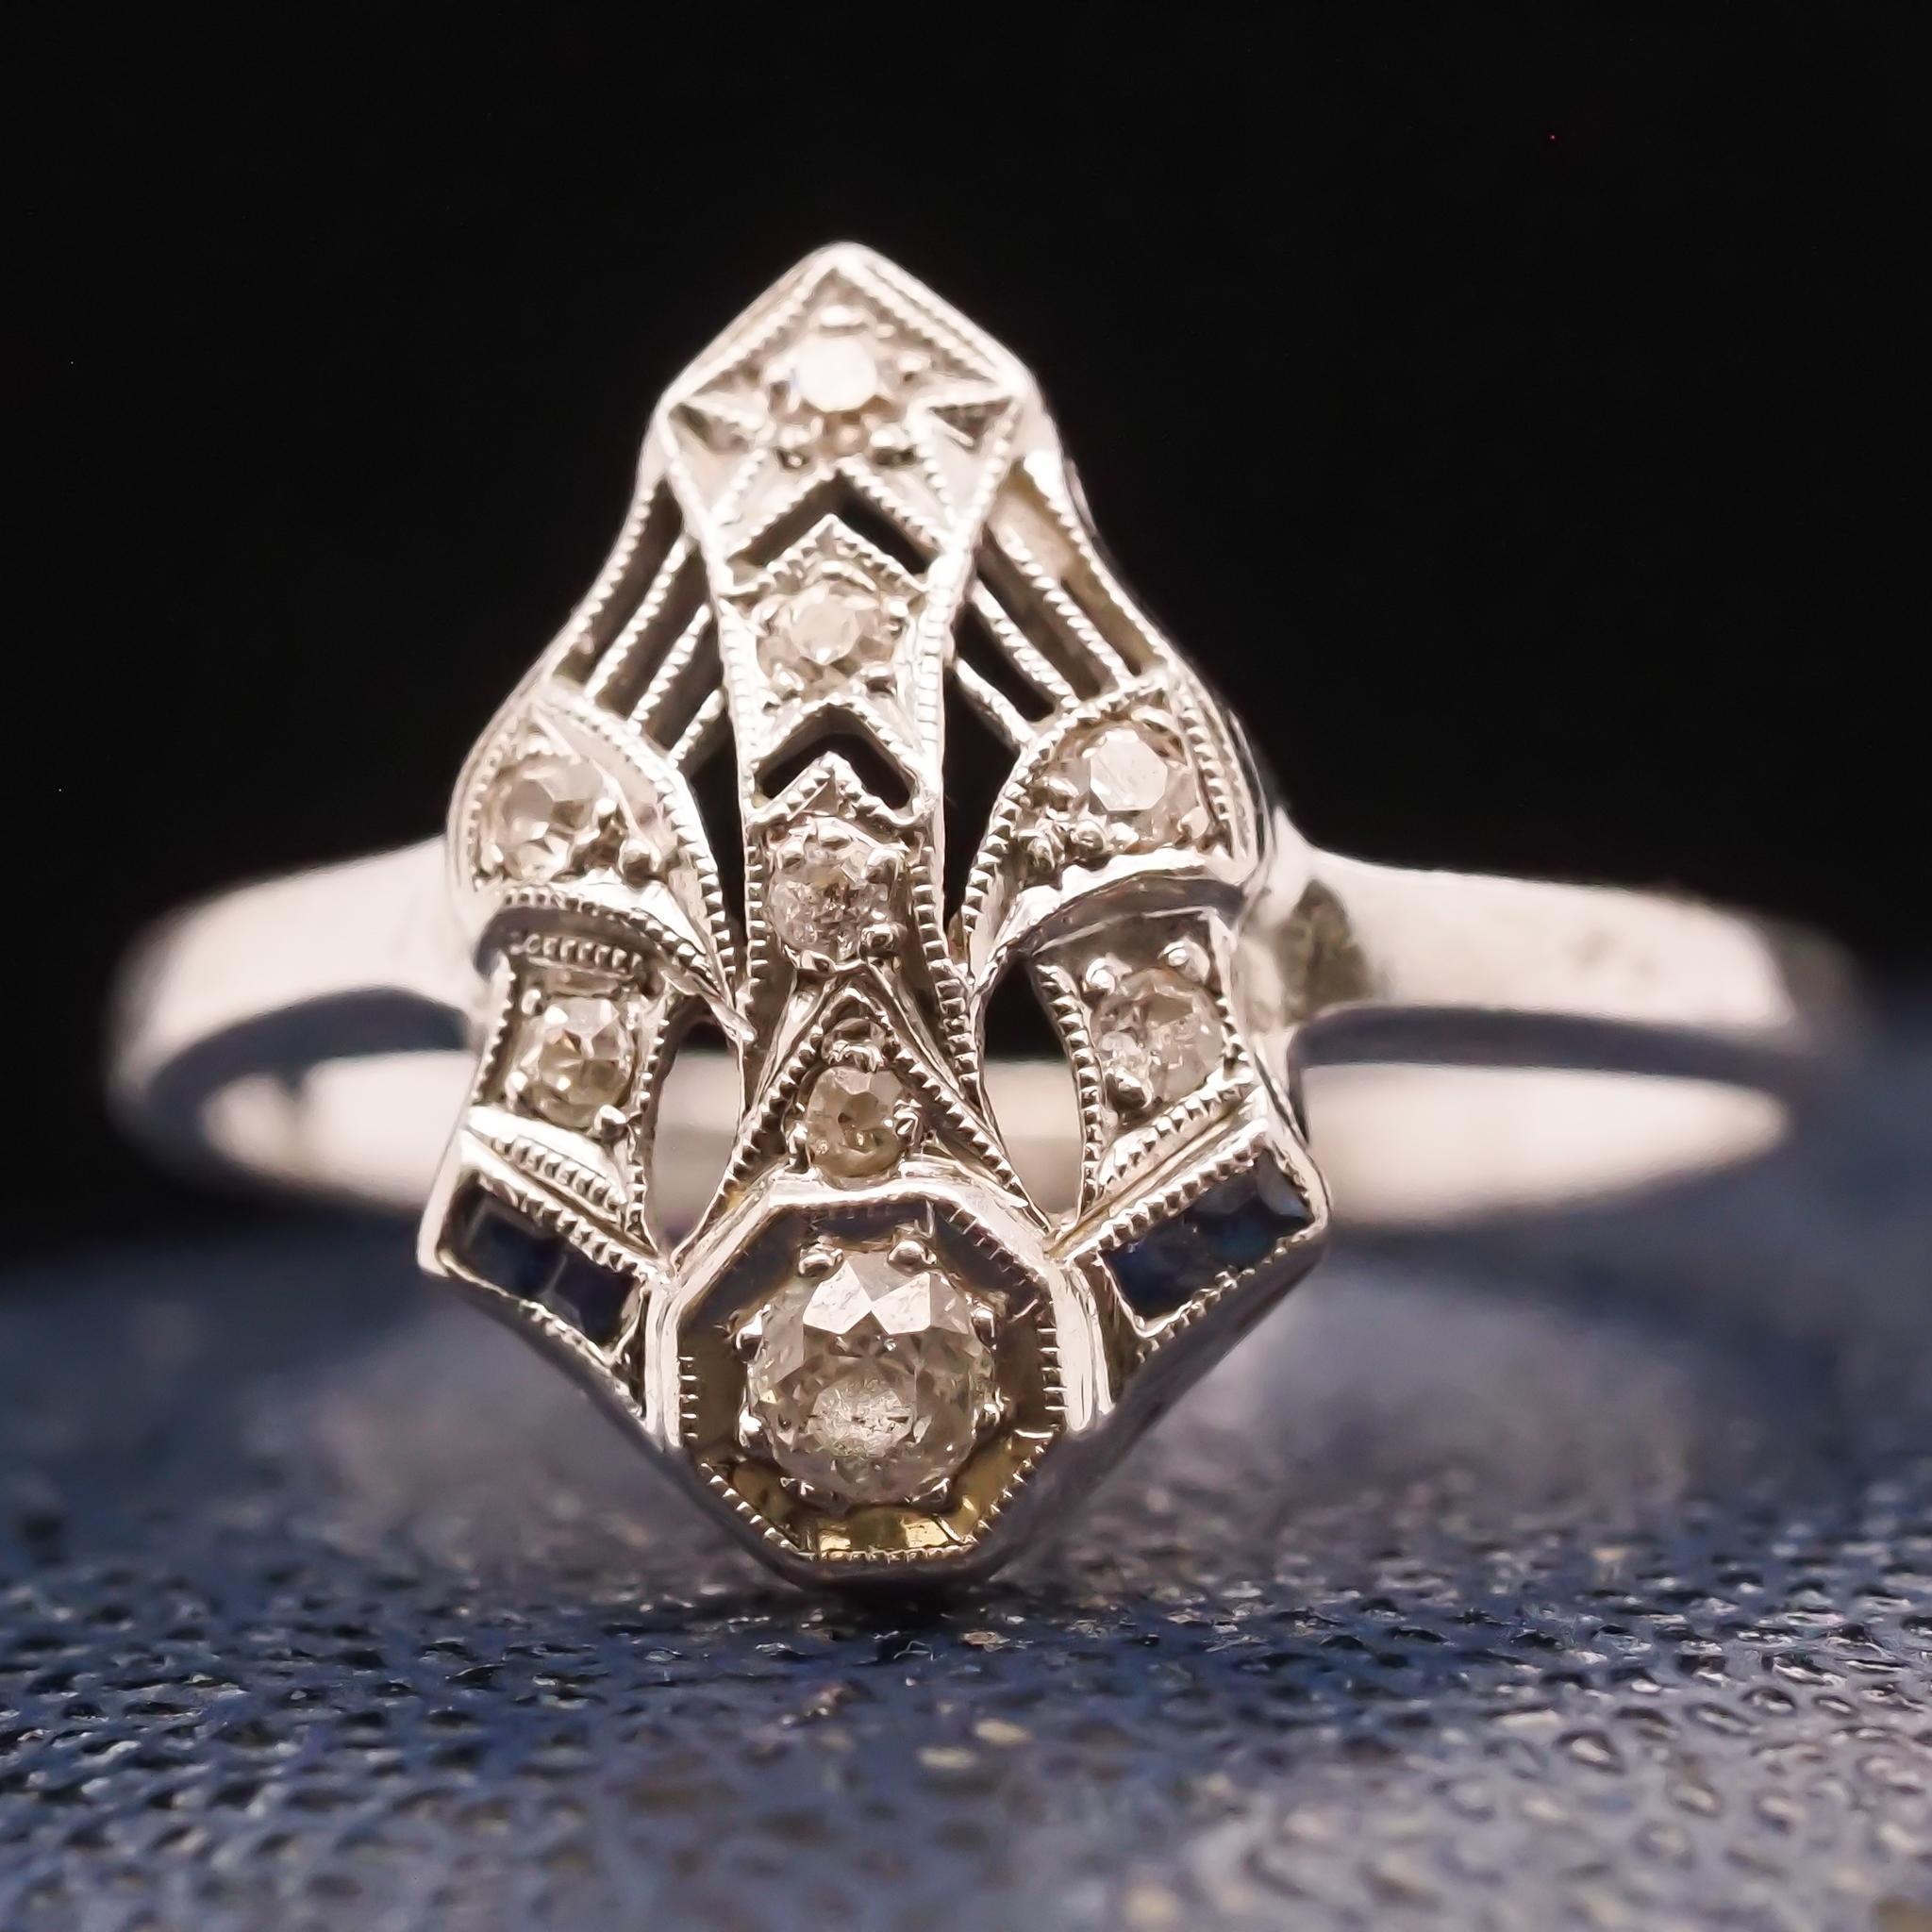 Year: 1940s
Item Details:
Ring Size: 8.25 (Sizable)
Metal Type: 14K White Gold [Hallmarked, and Tested]
Weight: 3.5 grams
Diamond Details: .15ct, Transitional Round, G color, VS Clarity
Sapphire Details: .05ct total weight,
Band Width: